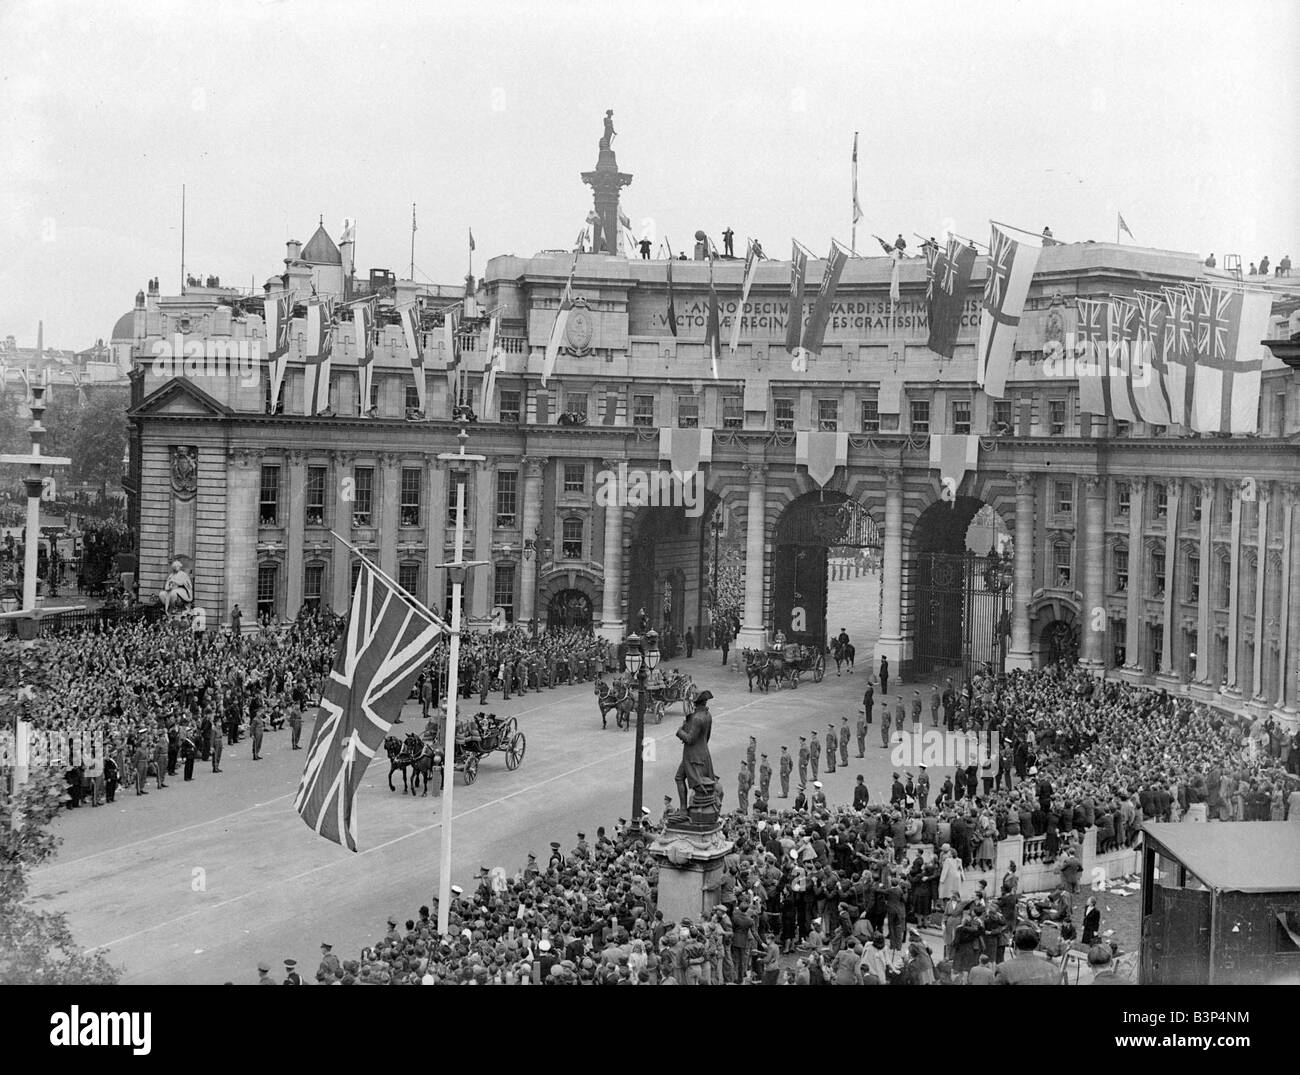 Members of the Royal Family pass under Admiralty Arch London during the Victory Day procession Stock Photo